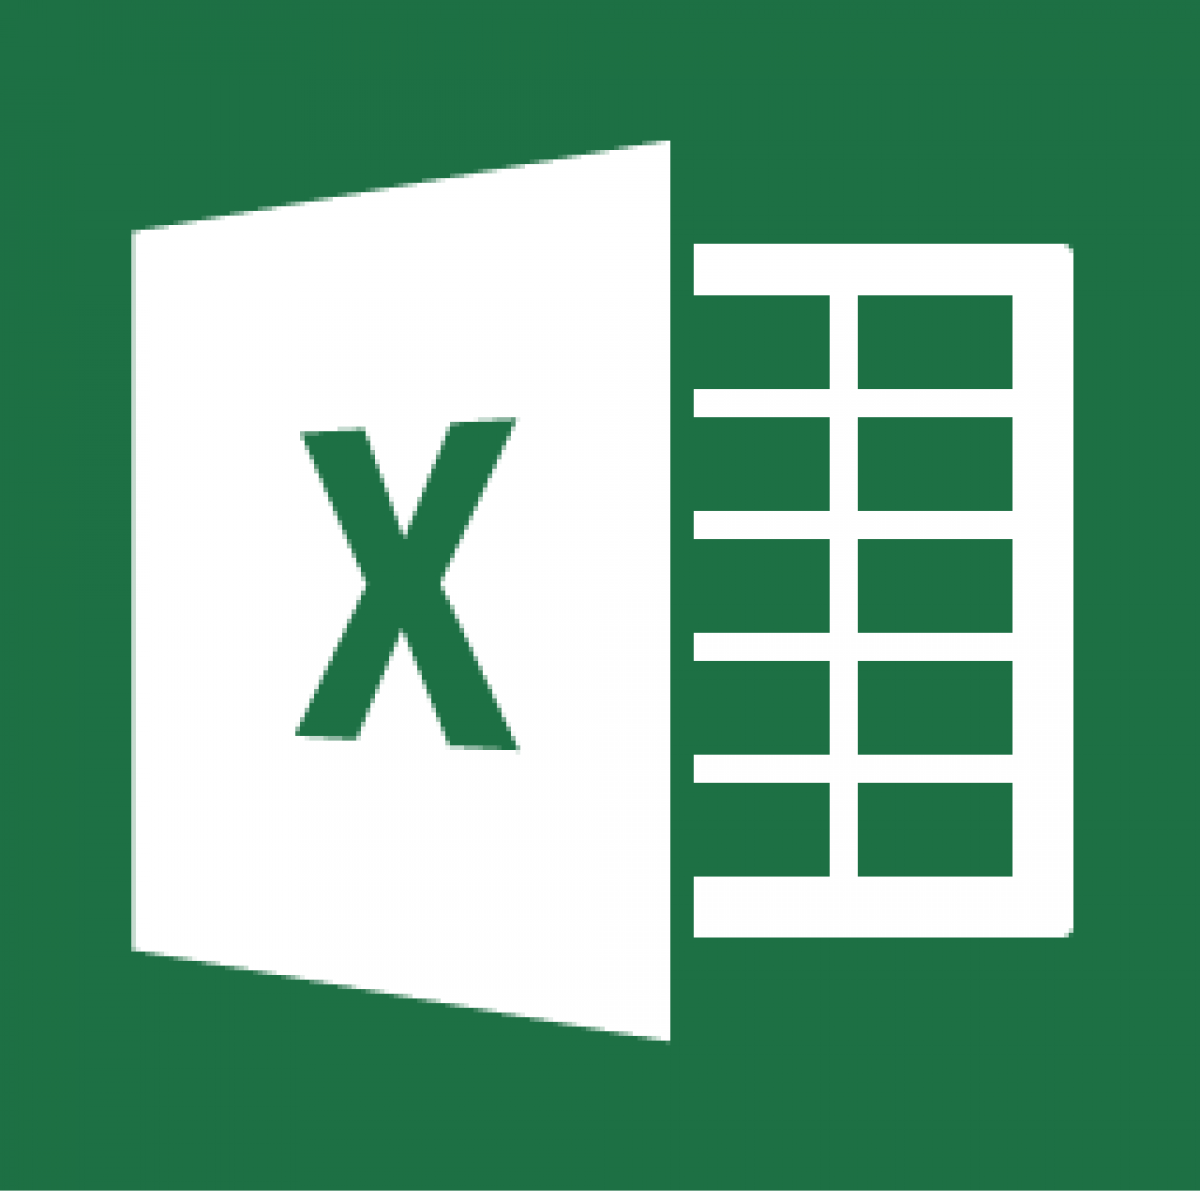 excel for mac tutorial 2010